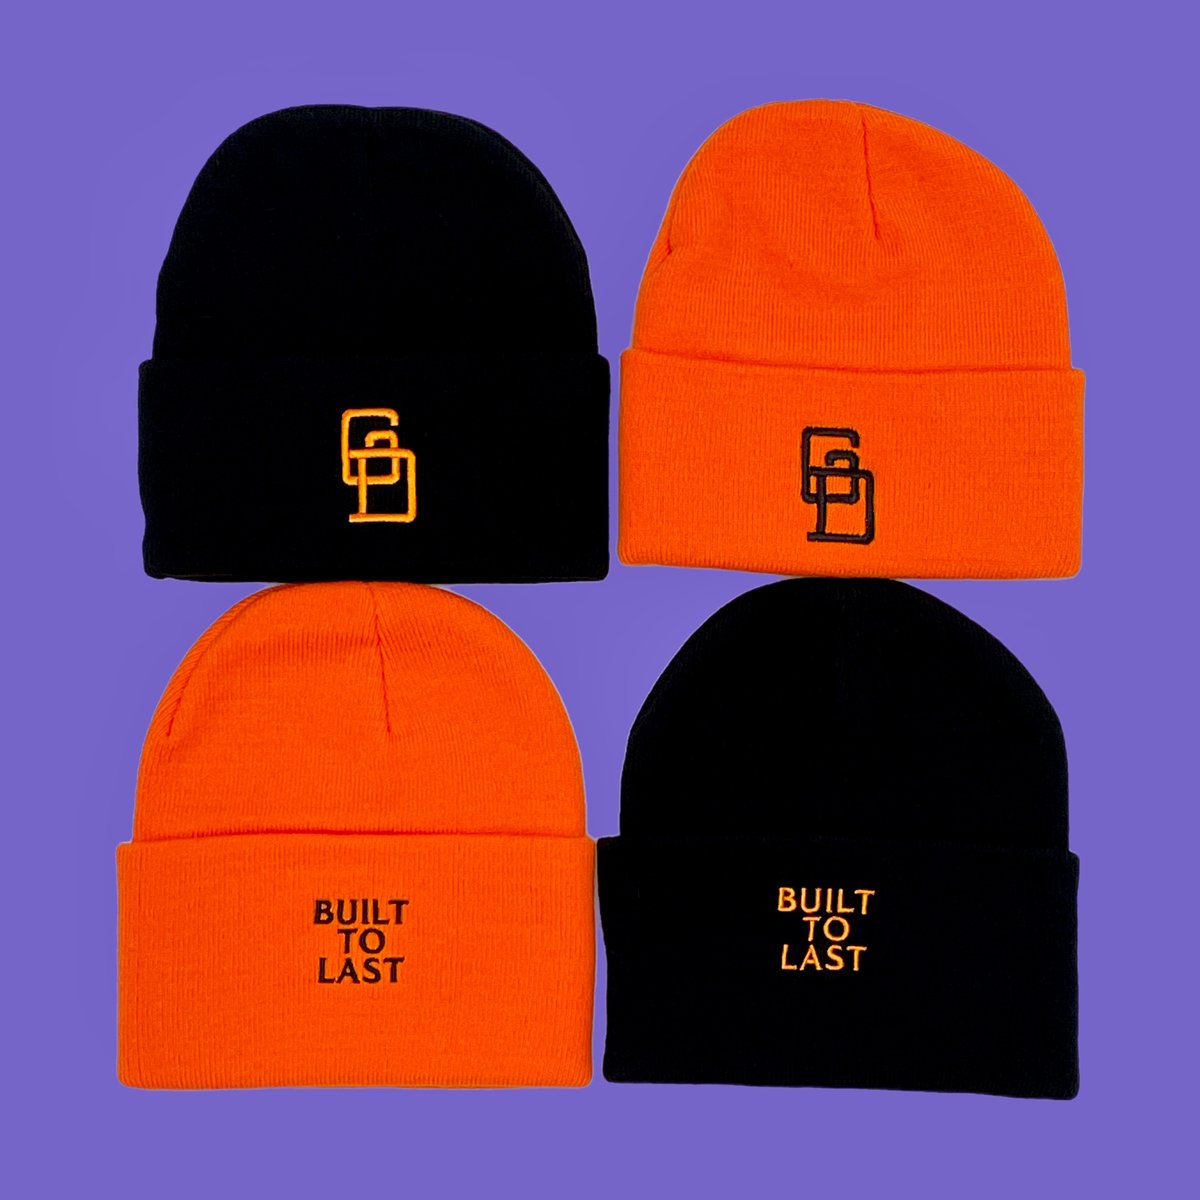 GD “BUILT TO LAST” EMBROIDERED BEANIES!!